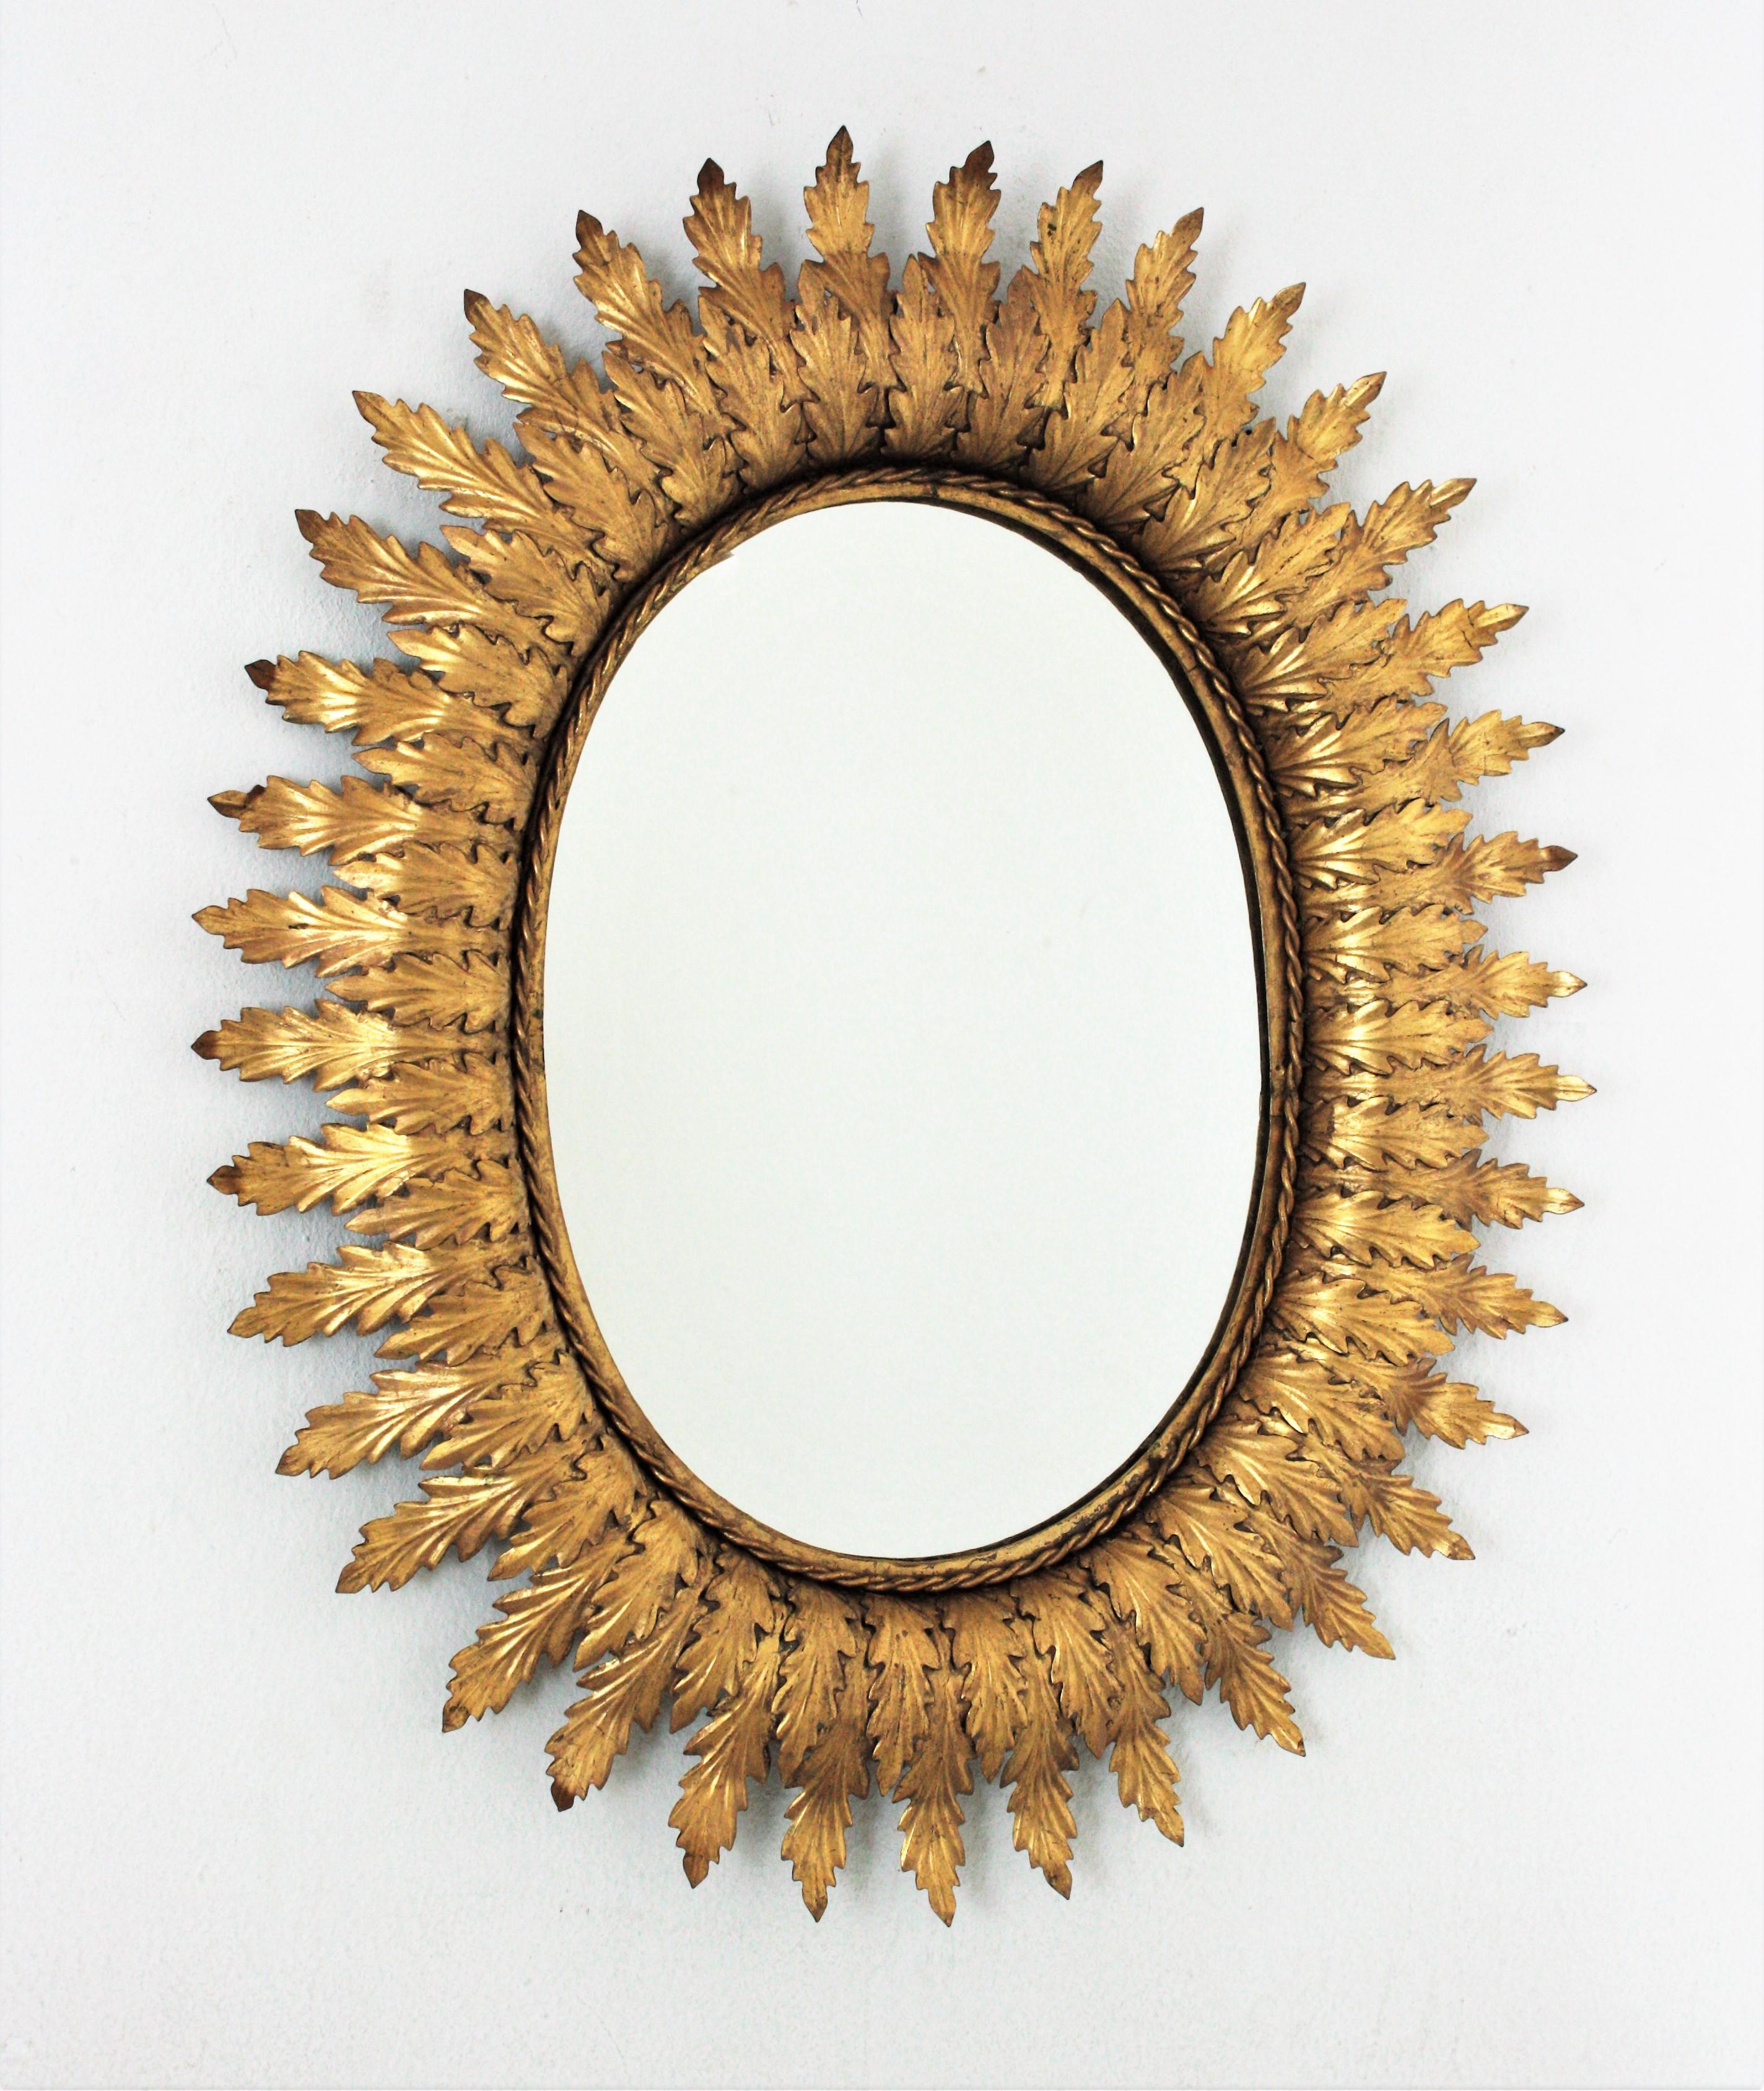 Eye-catching gilt metal oval shaped leafed sunburst mirror in the Hollywood Regency style, Spain, 1950s.
This beautiful wall mirror has a frame comprised of a series of overlaying leaves in two sizes. It has a nice aged patina and gold leaf